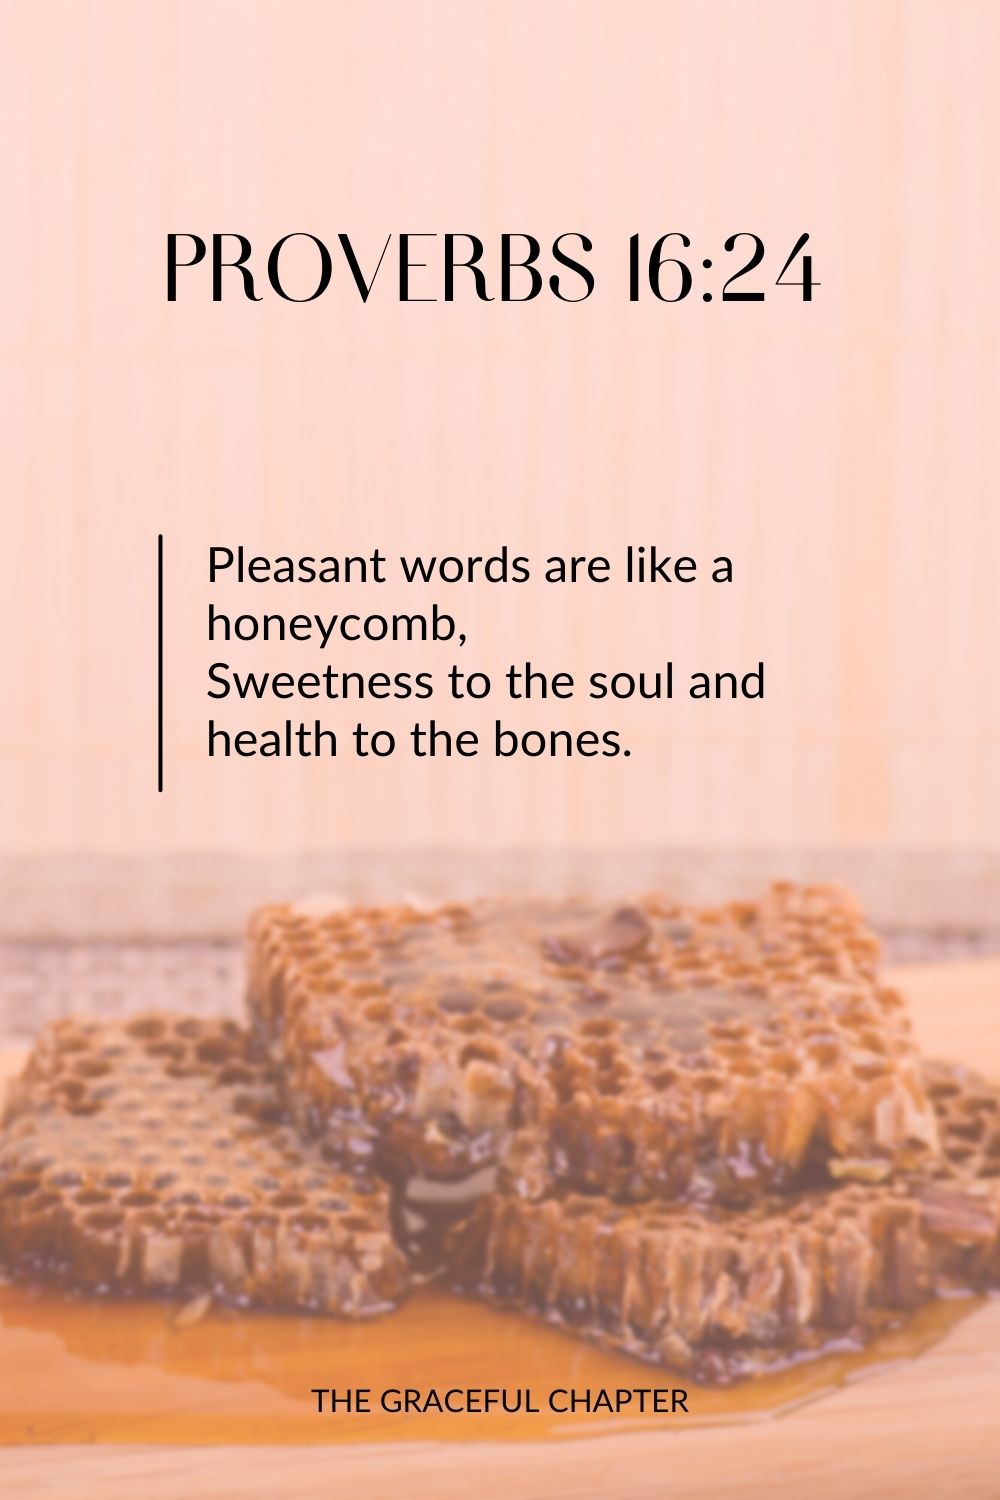 Pleasant words are like a honeycomb, Sweetness to the soul and health to the bones. Proverbs 16:24